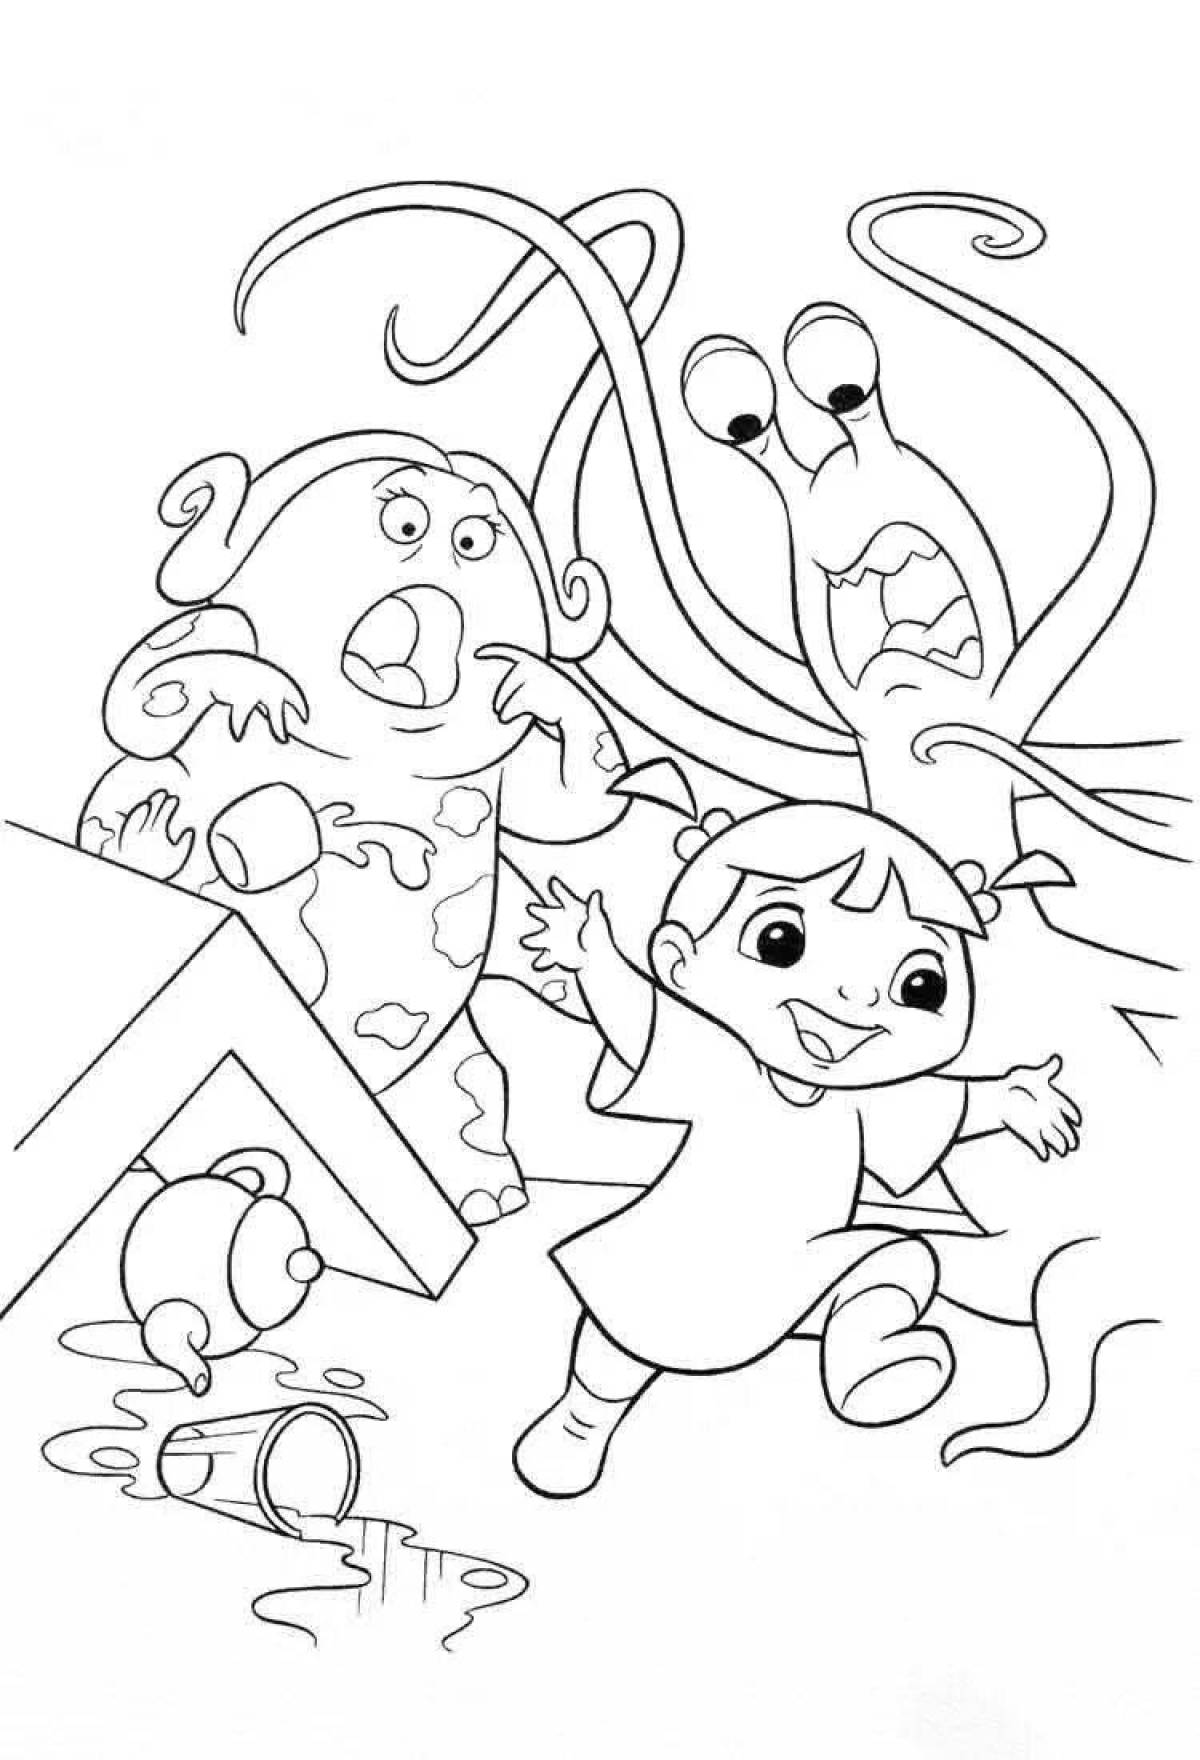 Coloring book magical monsters corporation for kids